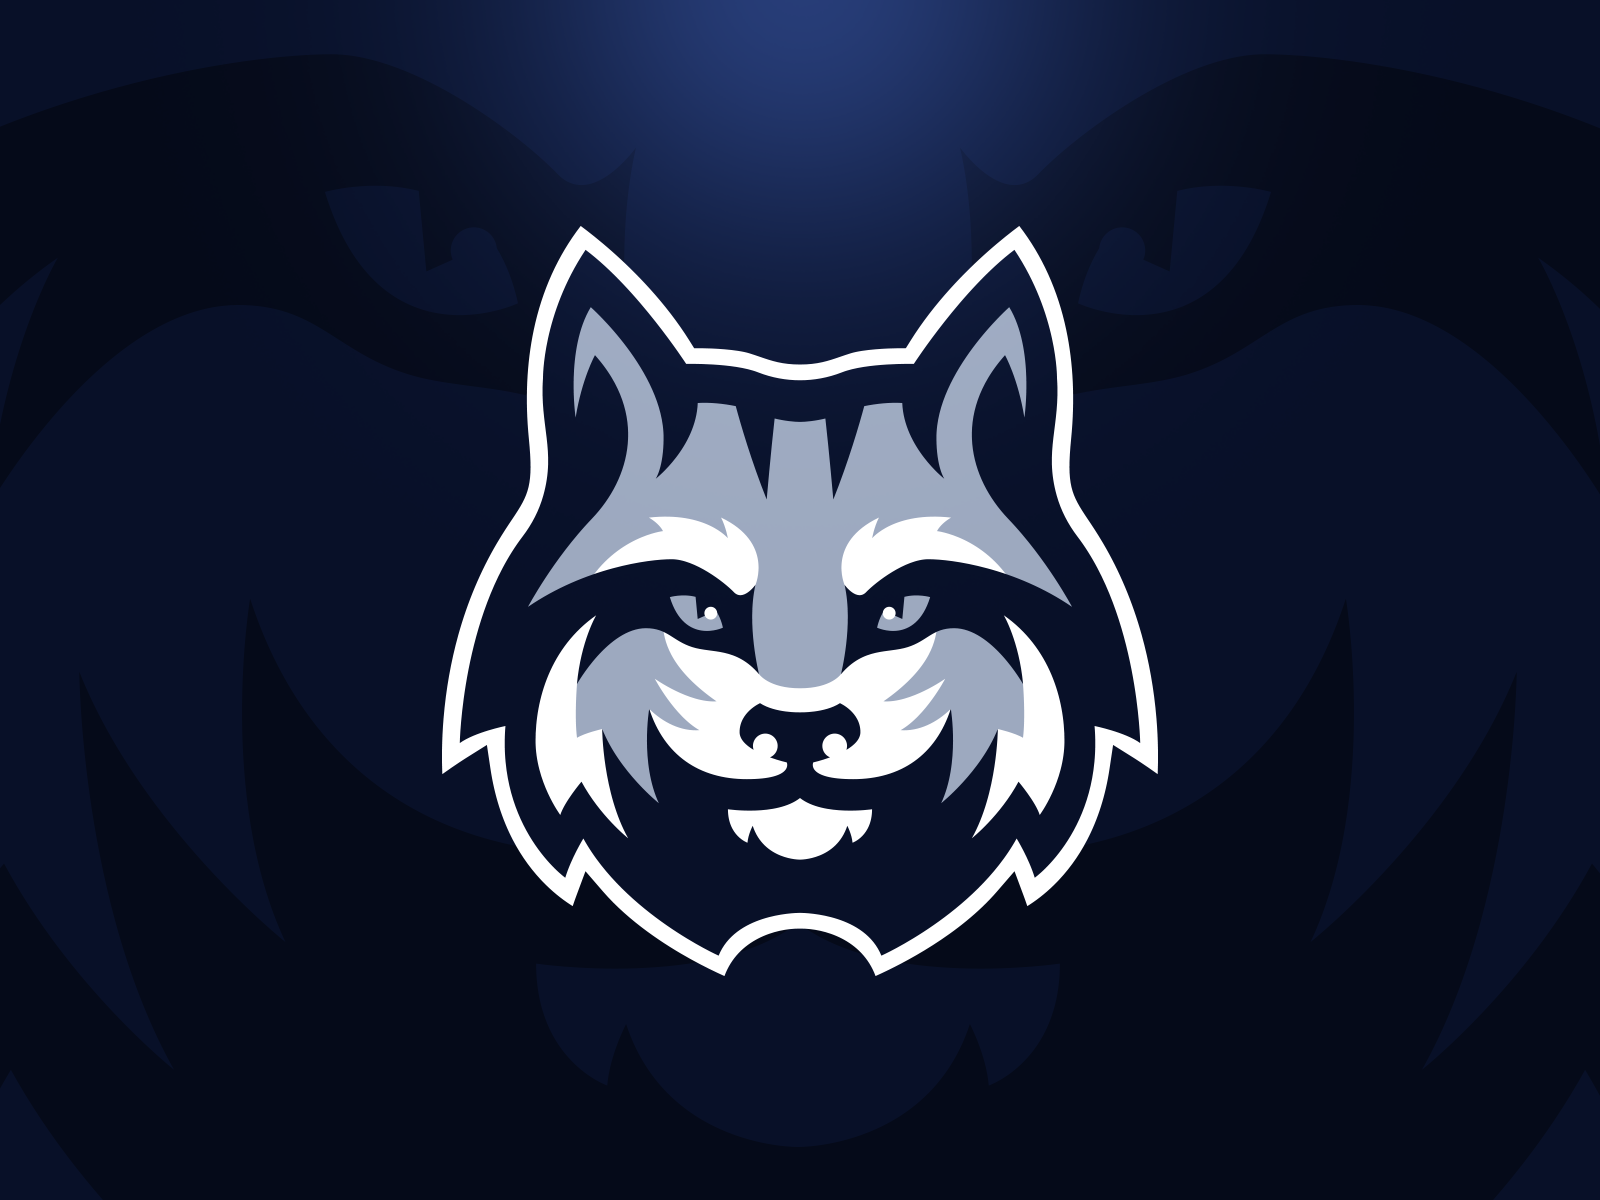 Lynx Logo Design by Kyle Papple on Dribbble